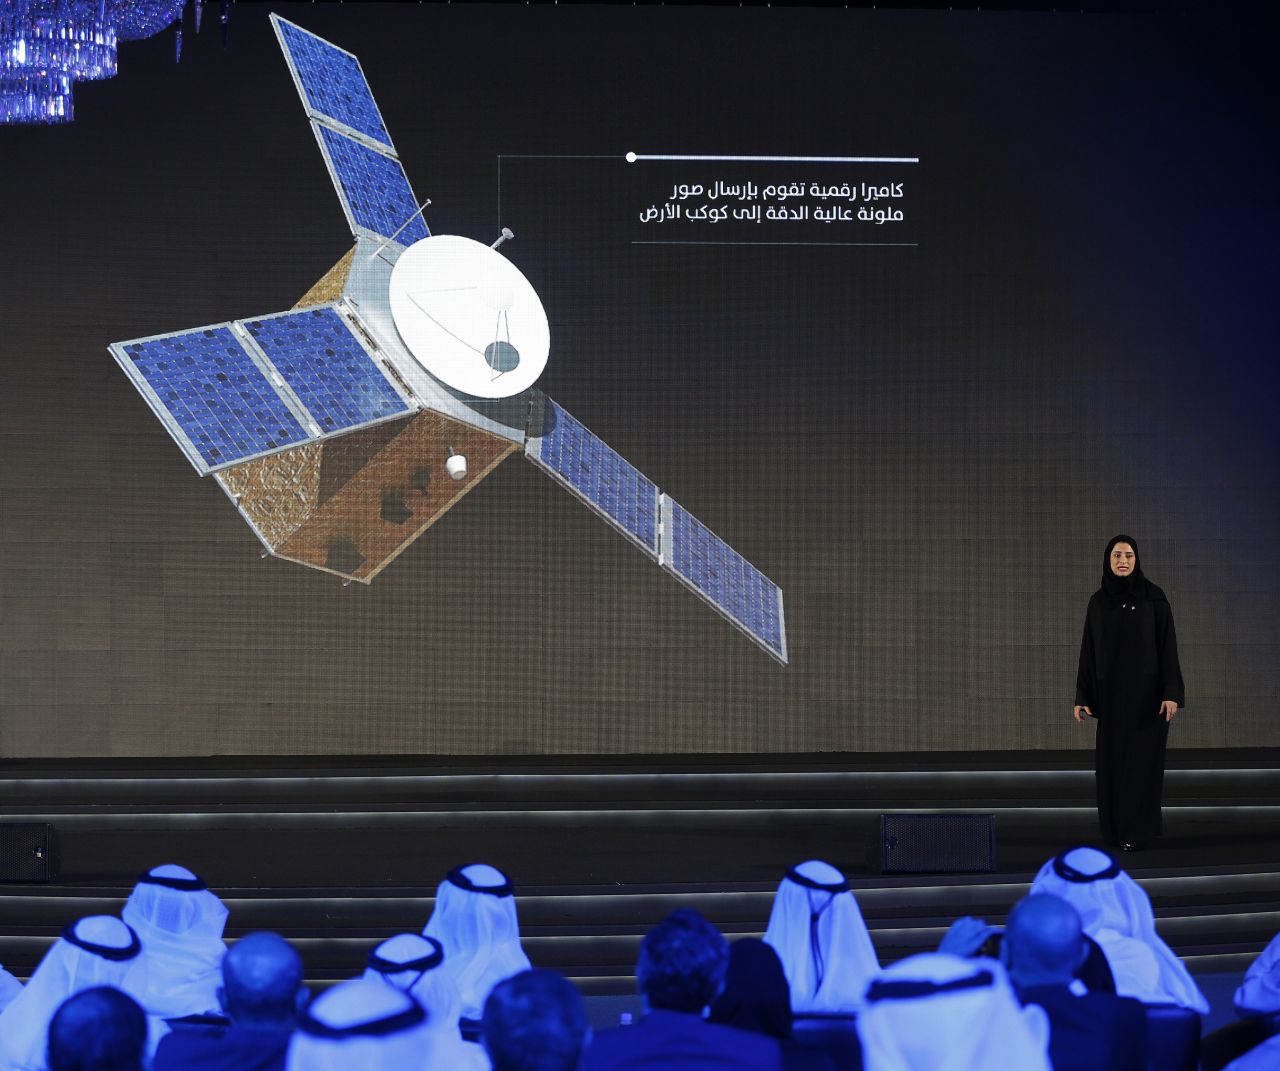 If successful, Al Amal will begin its orbit of the Martian surface in 2021, in time for the 50th anniversary of the founding of the UAE.